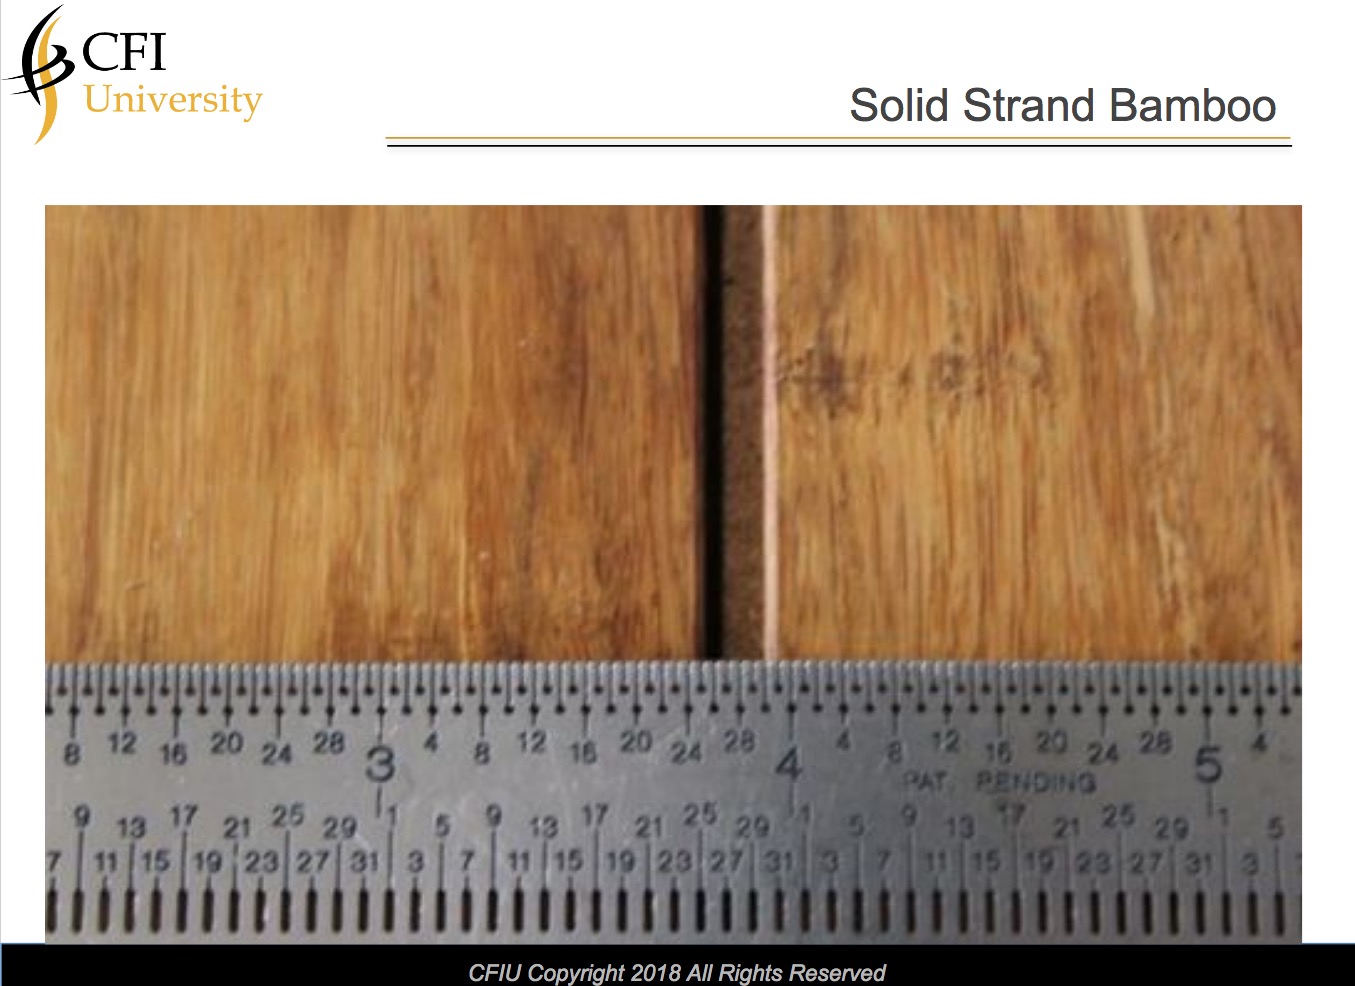 Bamboo, Solid Strand- Course & Exam- Advanced Certification